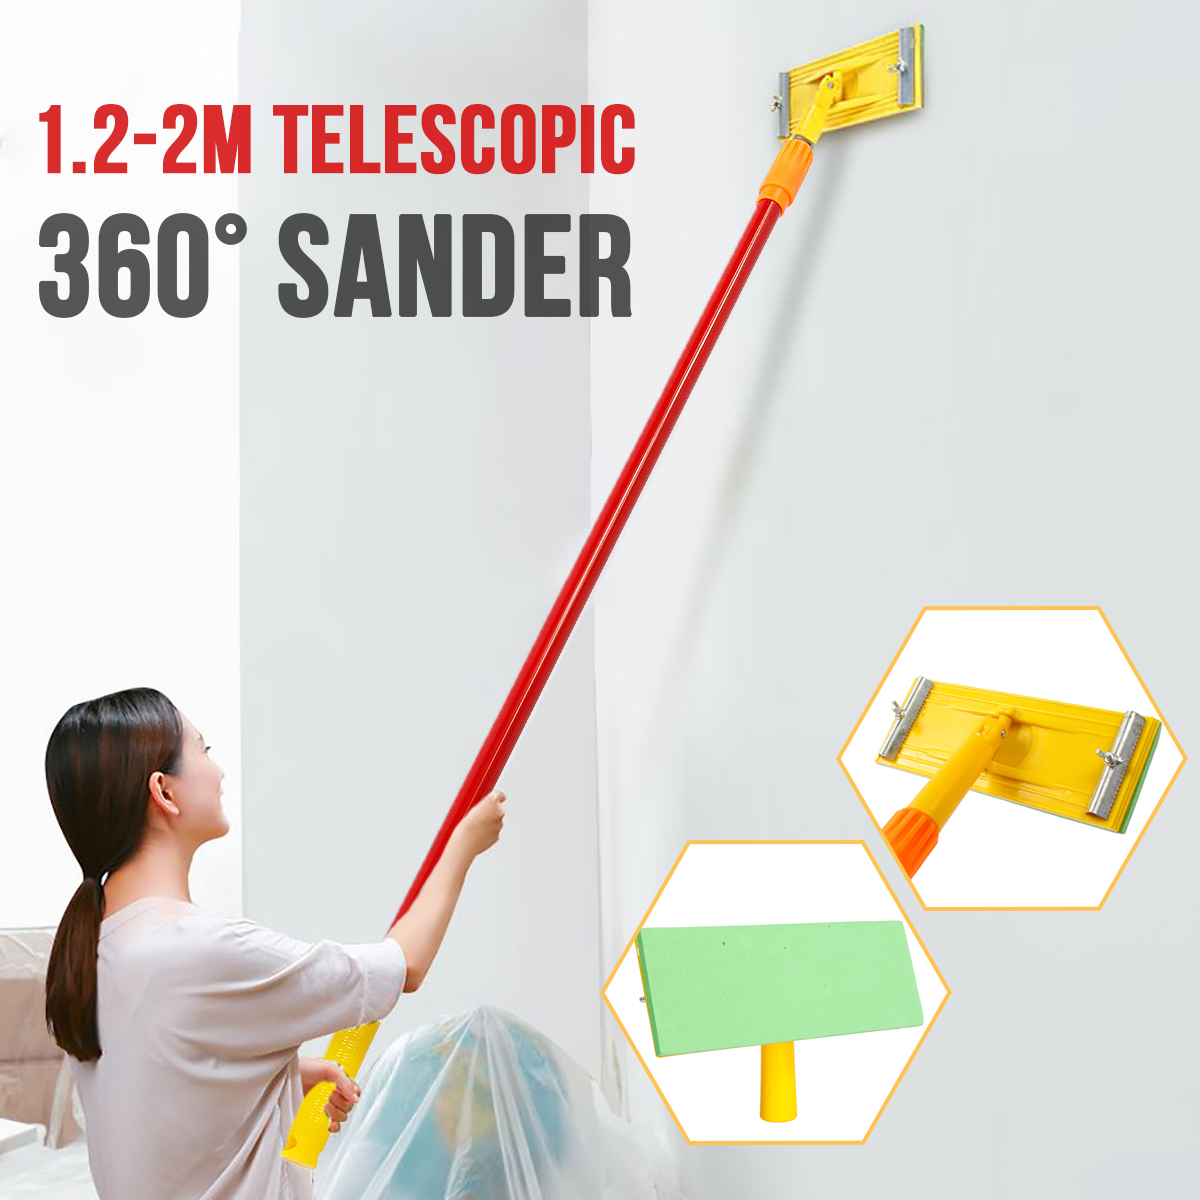 Find 1 2m Adjustable Telescopic Handle Mop Retractable Pole Stick Cleaning Brush Sander Head Bracket Washing Baseboard Cleaning for Sale on Gipsybee.com with cryptocurrencies